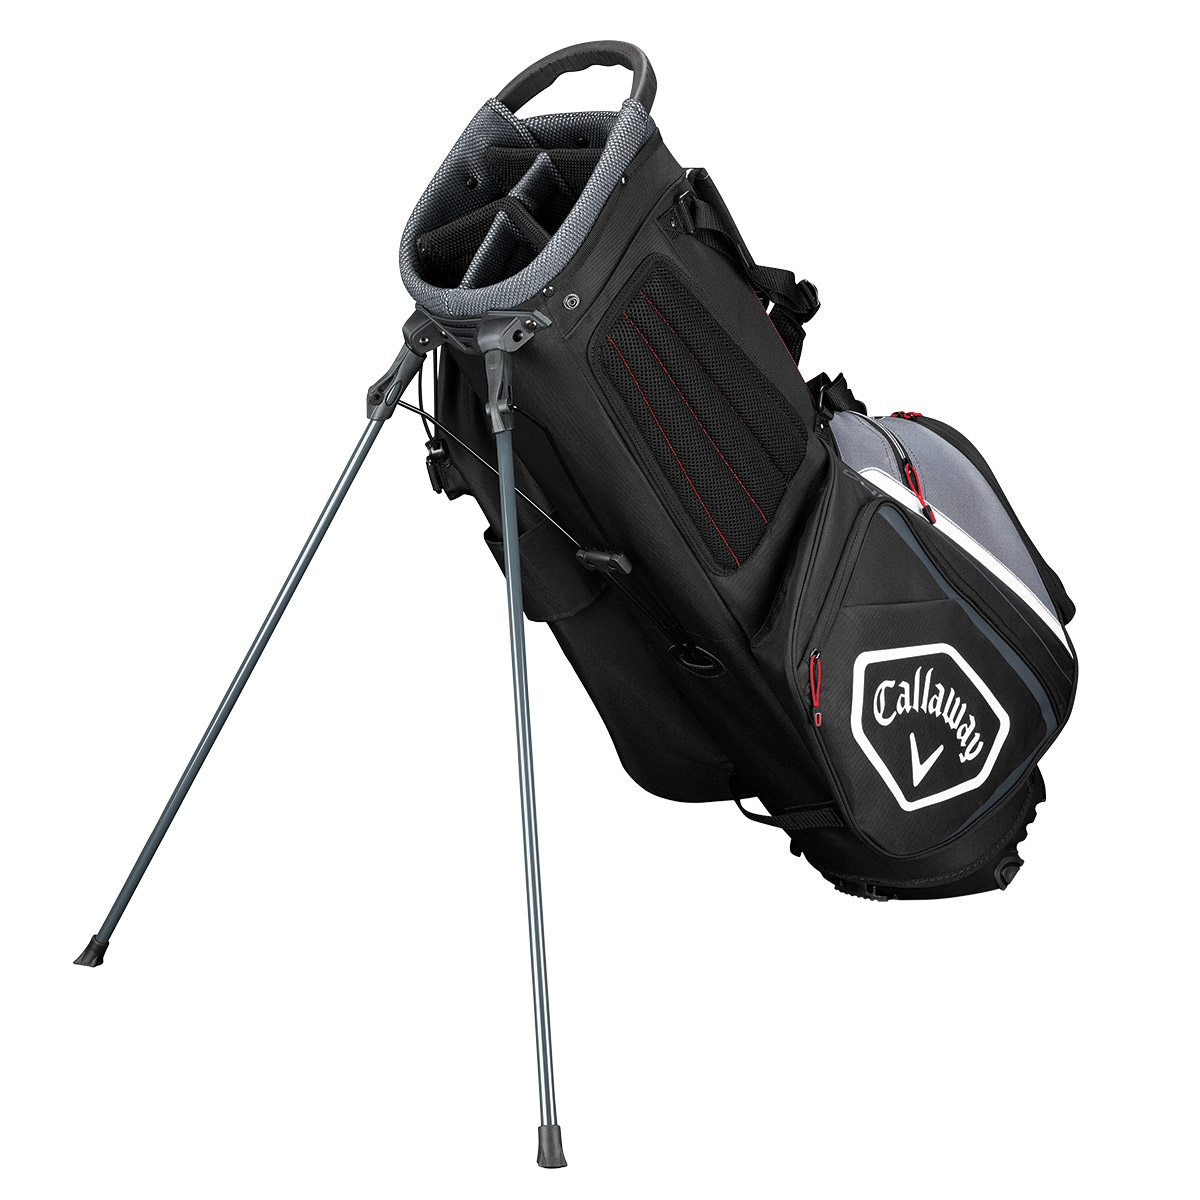 Callaway Golf Chev Stand Bag 2019 from american golf